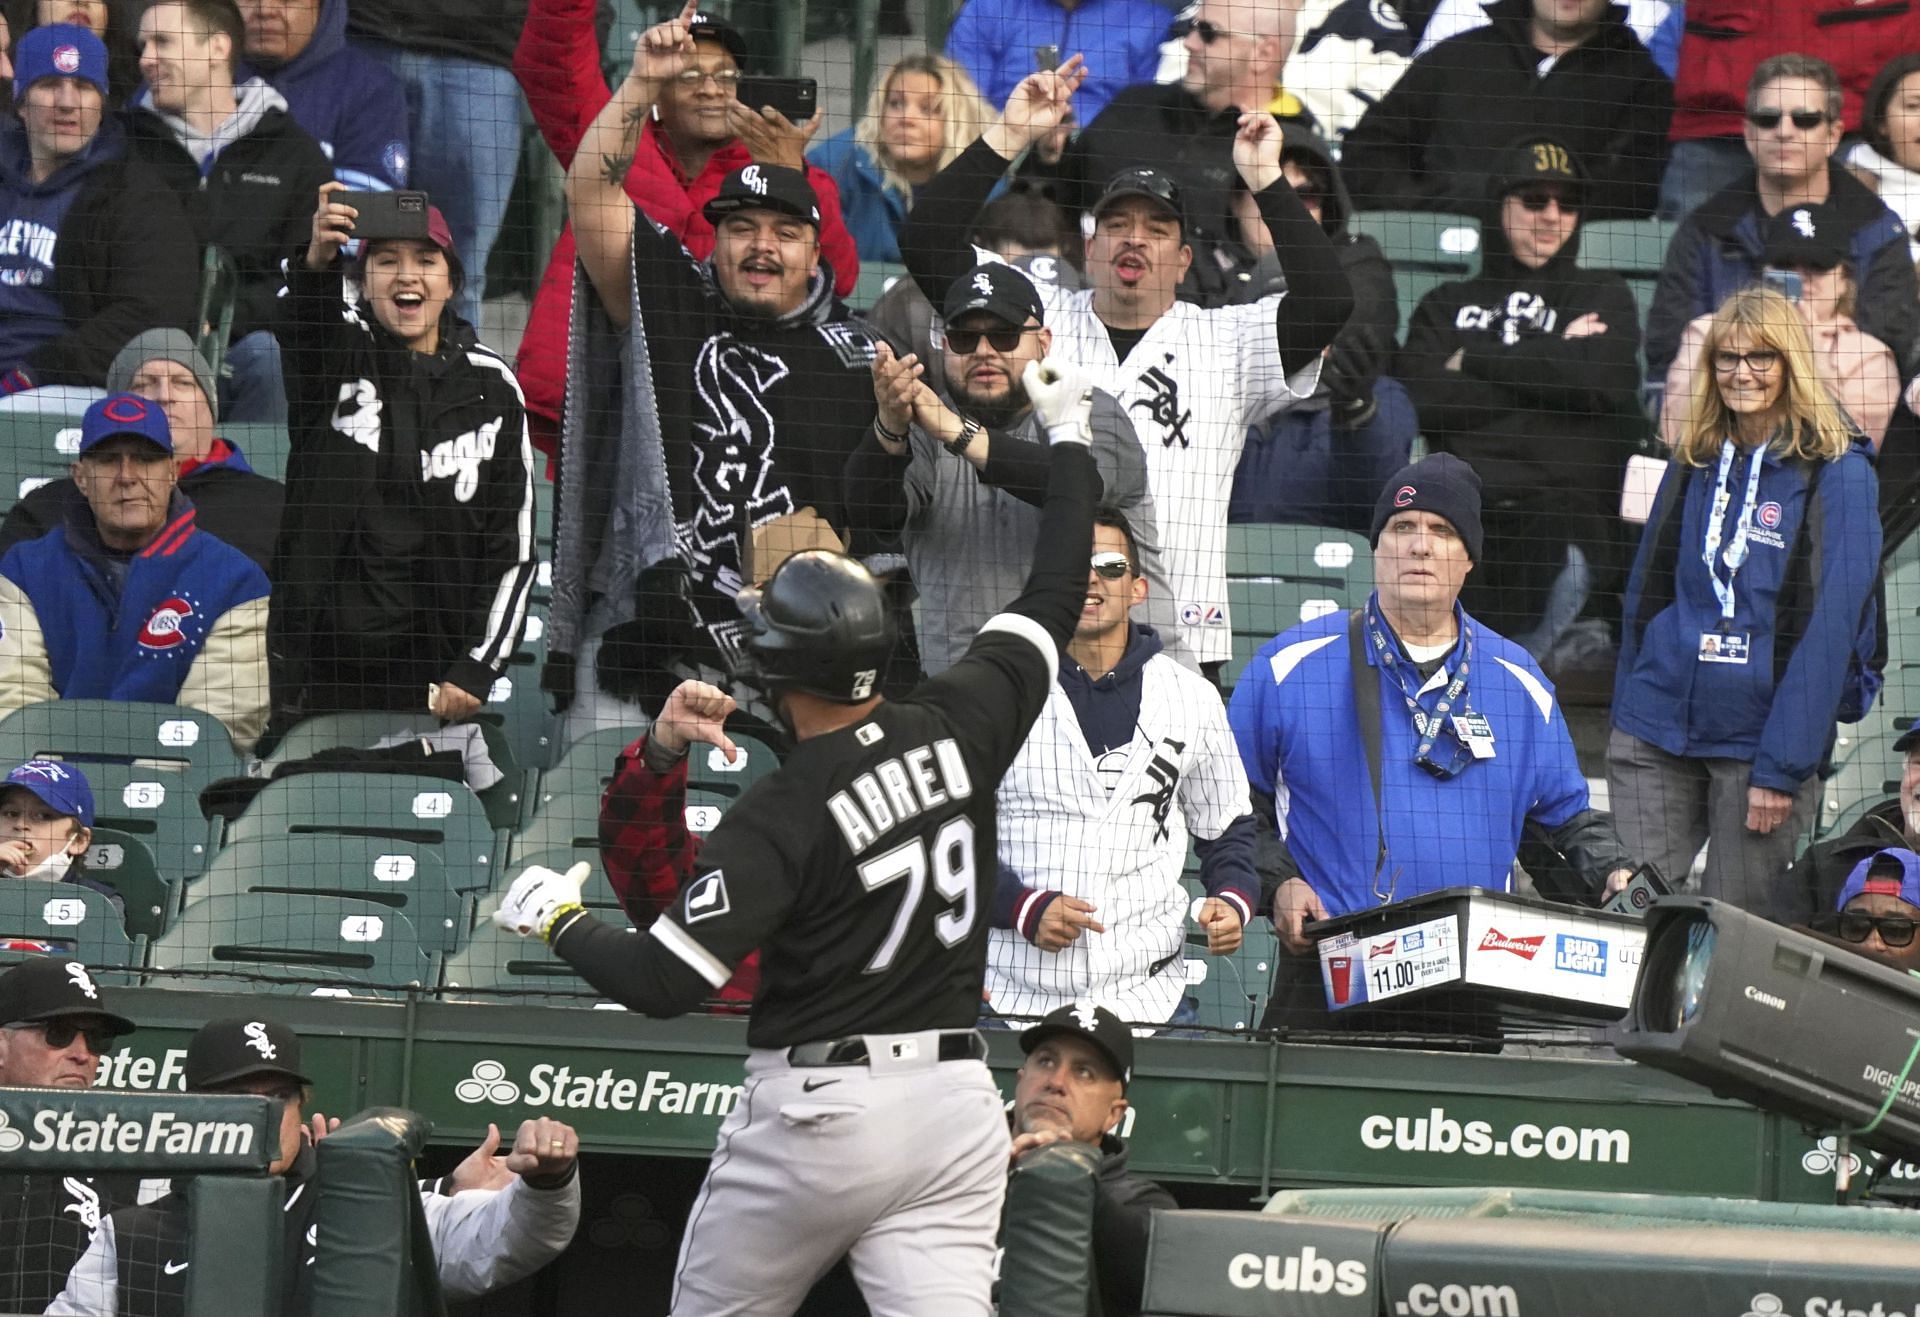 Chicago White Sox first baseman Jose Abreu has been showing signs of heating up.